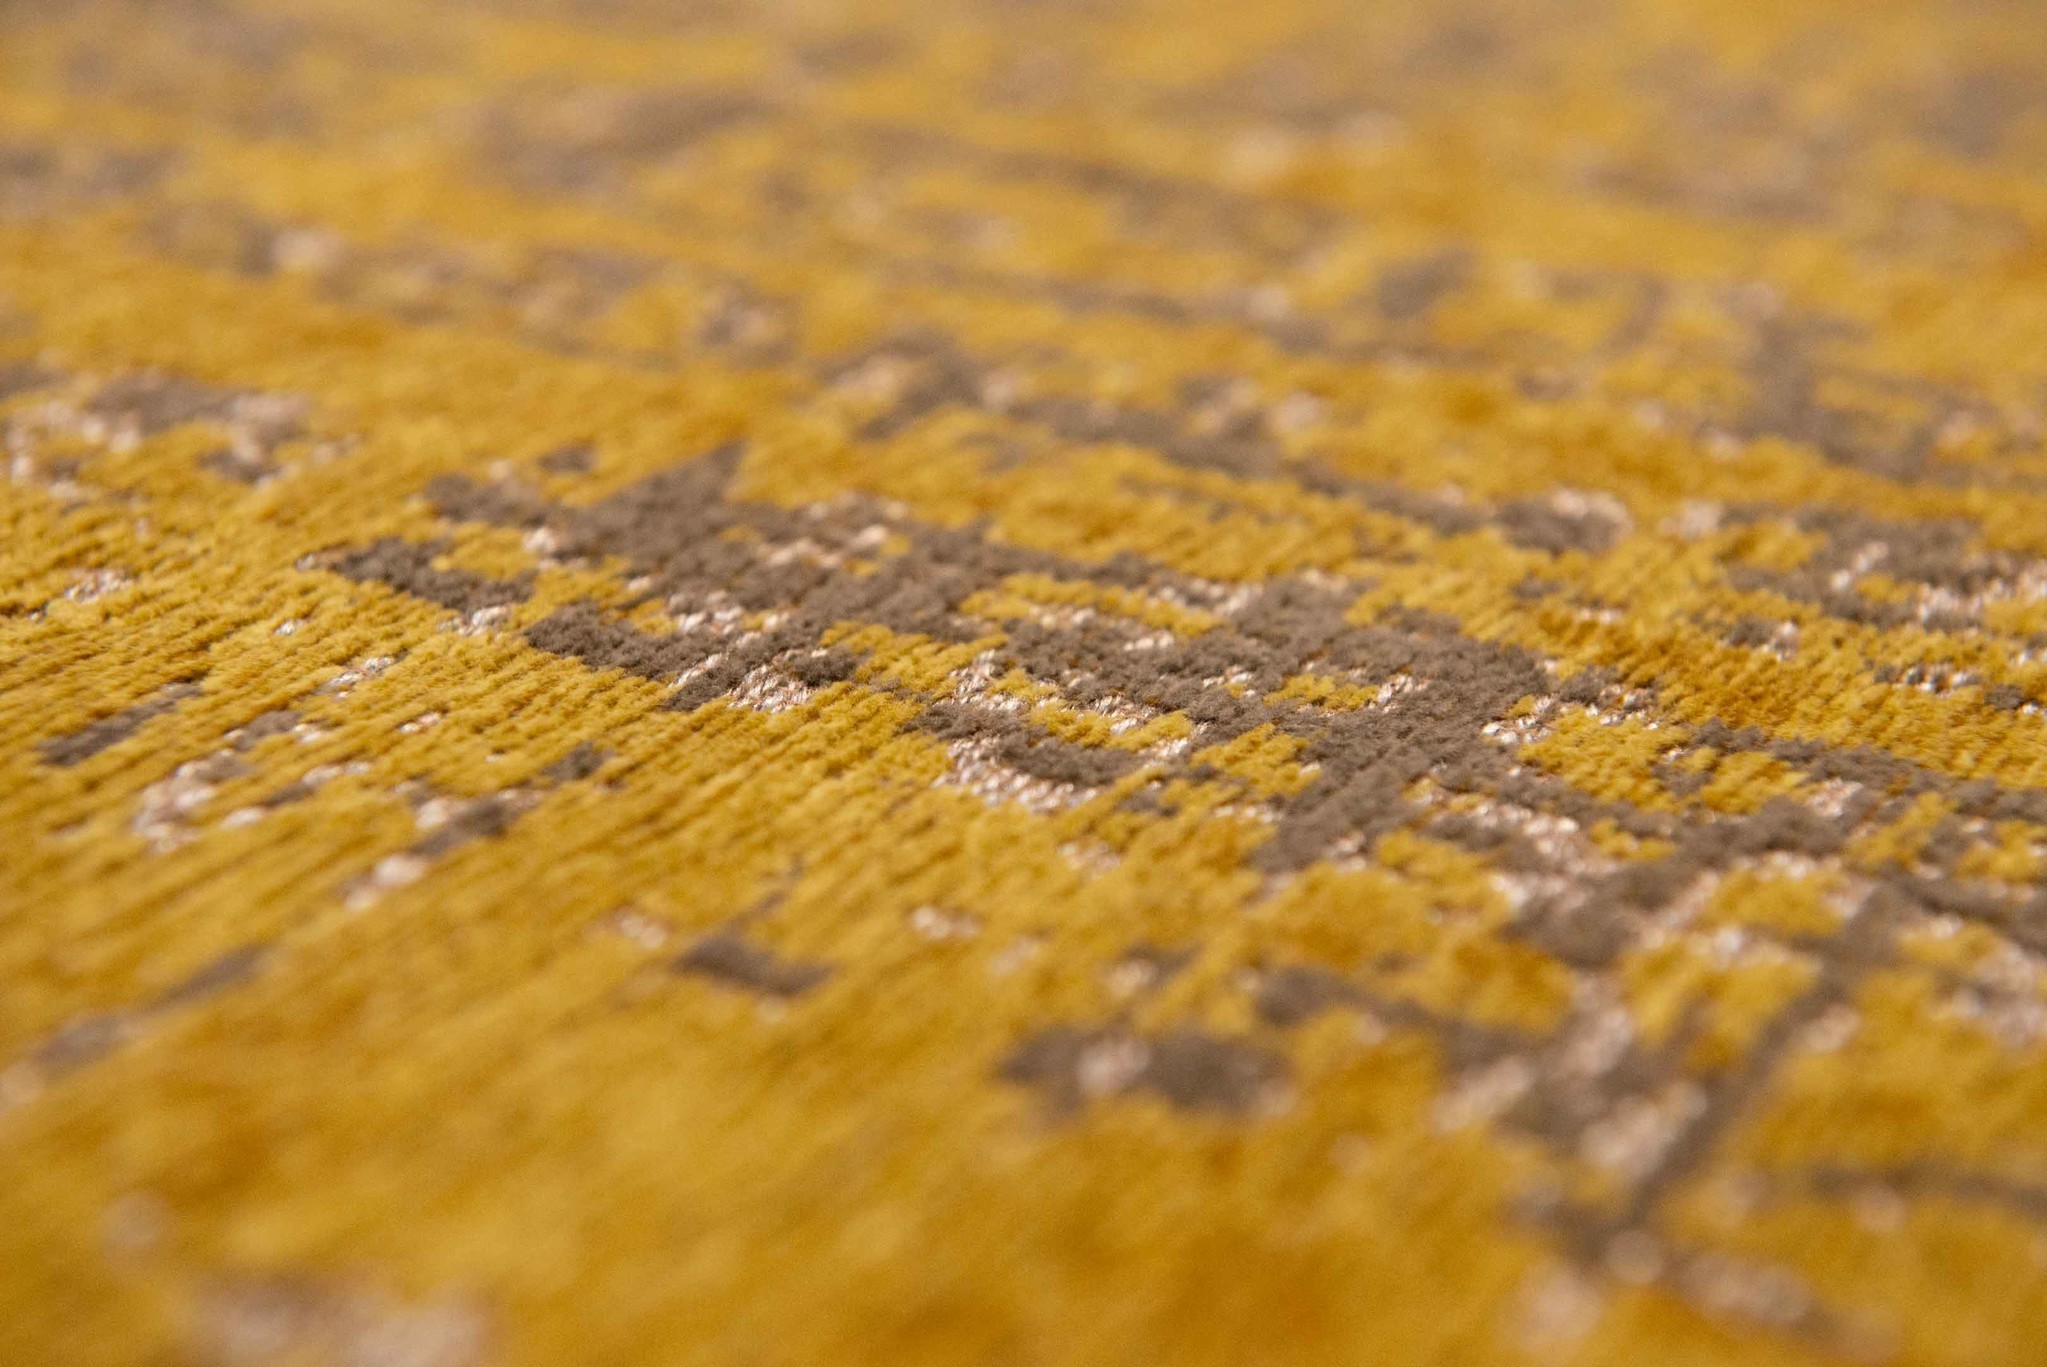 Abstract Gold Belgian Rug ☞ Size: 5' 7" x 8' (170 x 240 cm)